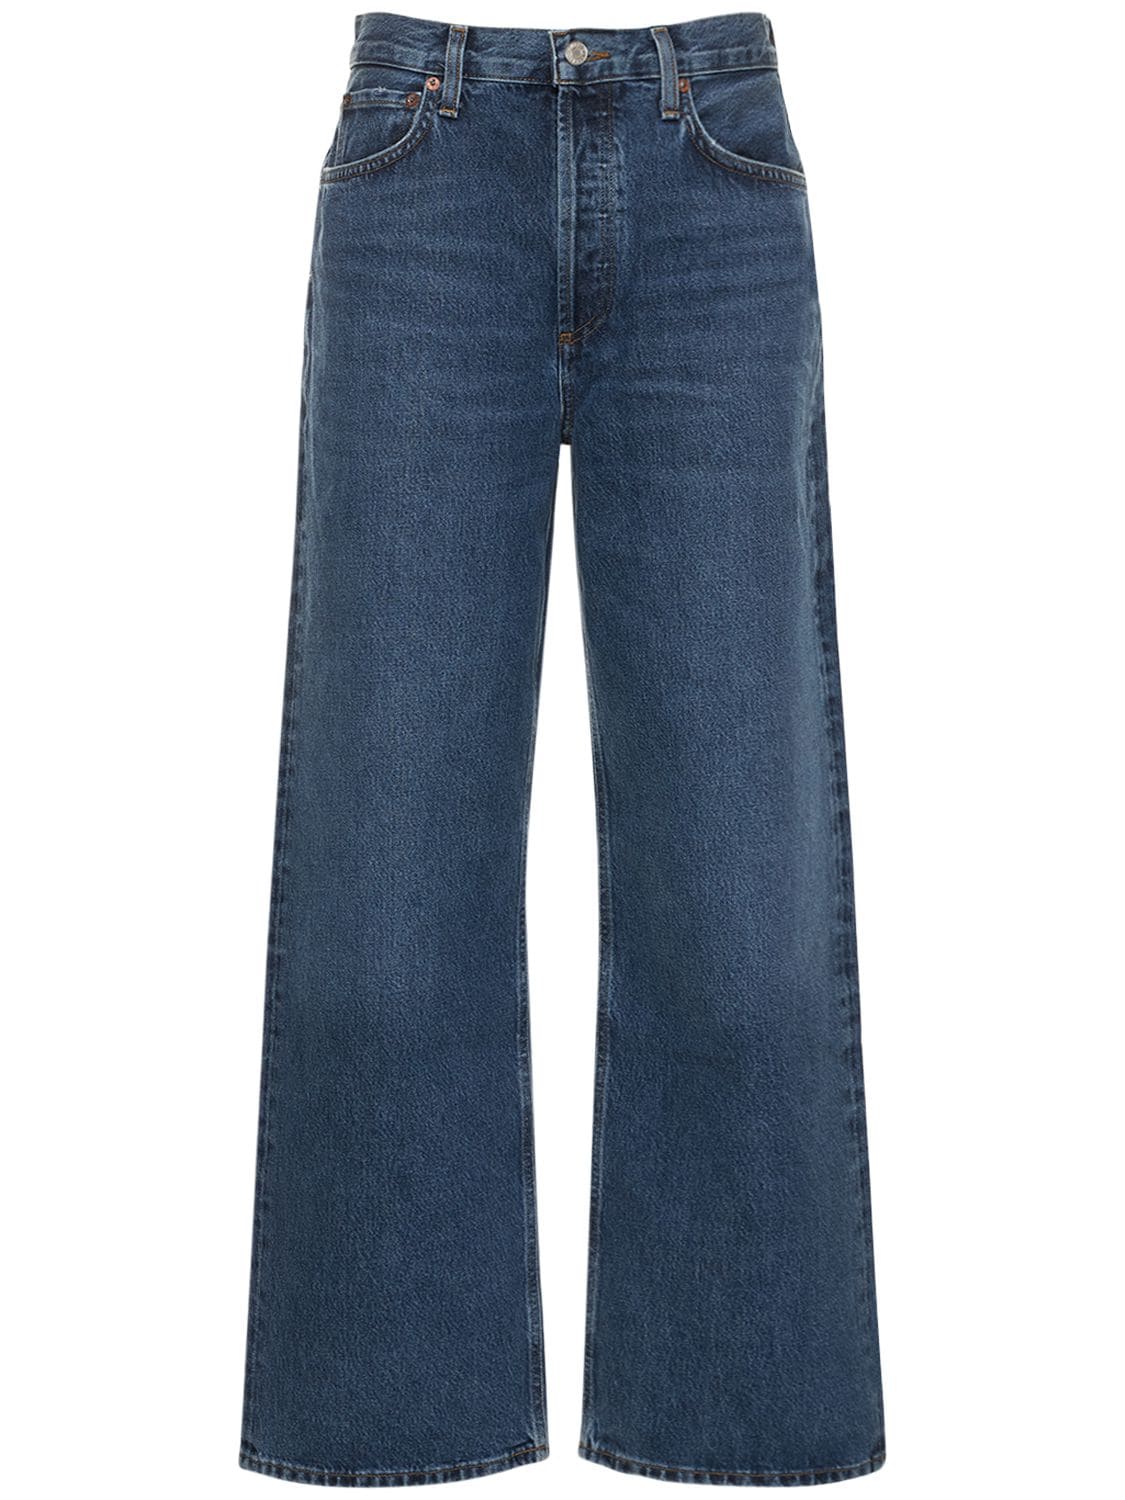 Image of Low Slung Baggy Jeans